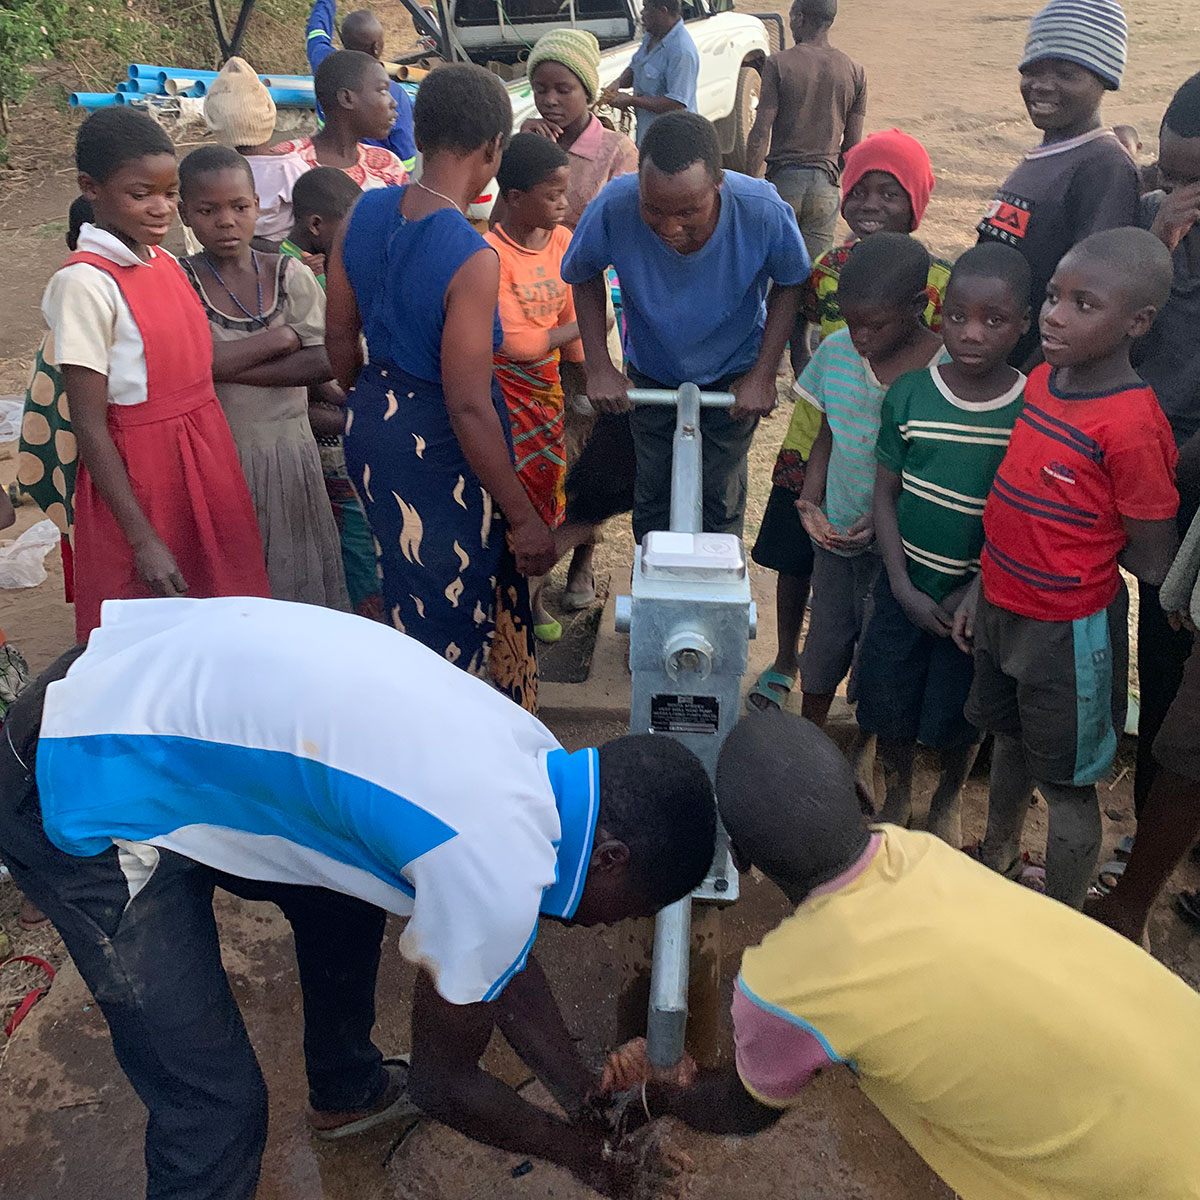 Give Now: Help us provide clean water and orphan care to southeast Africa